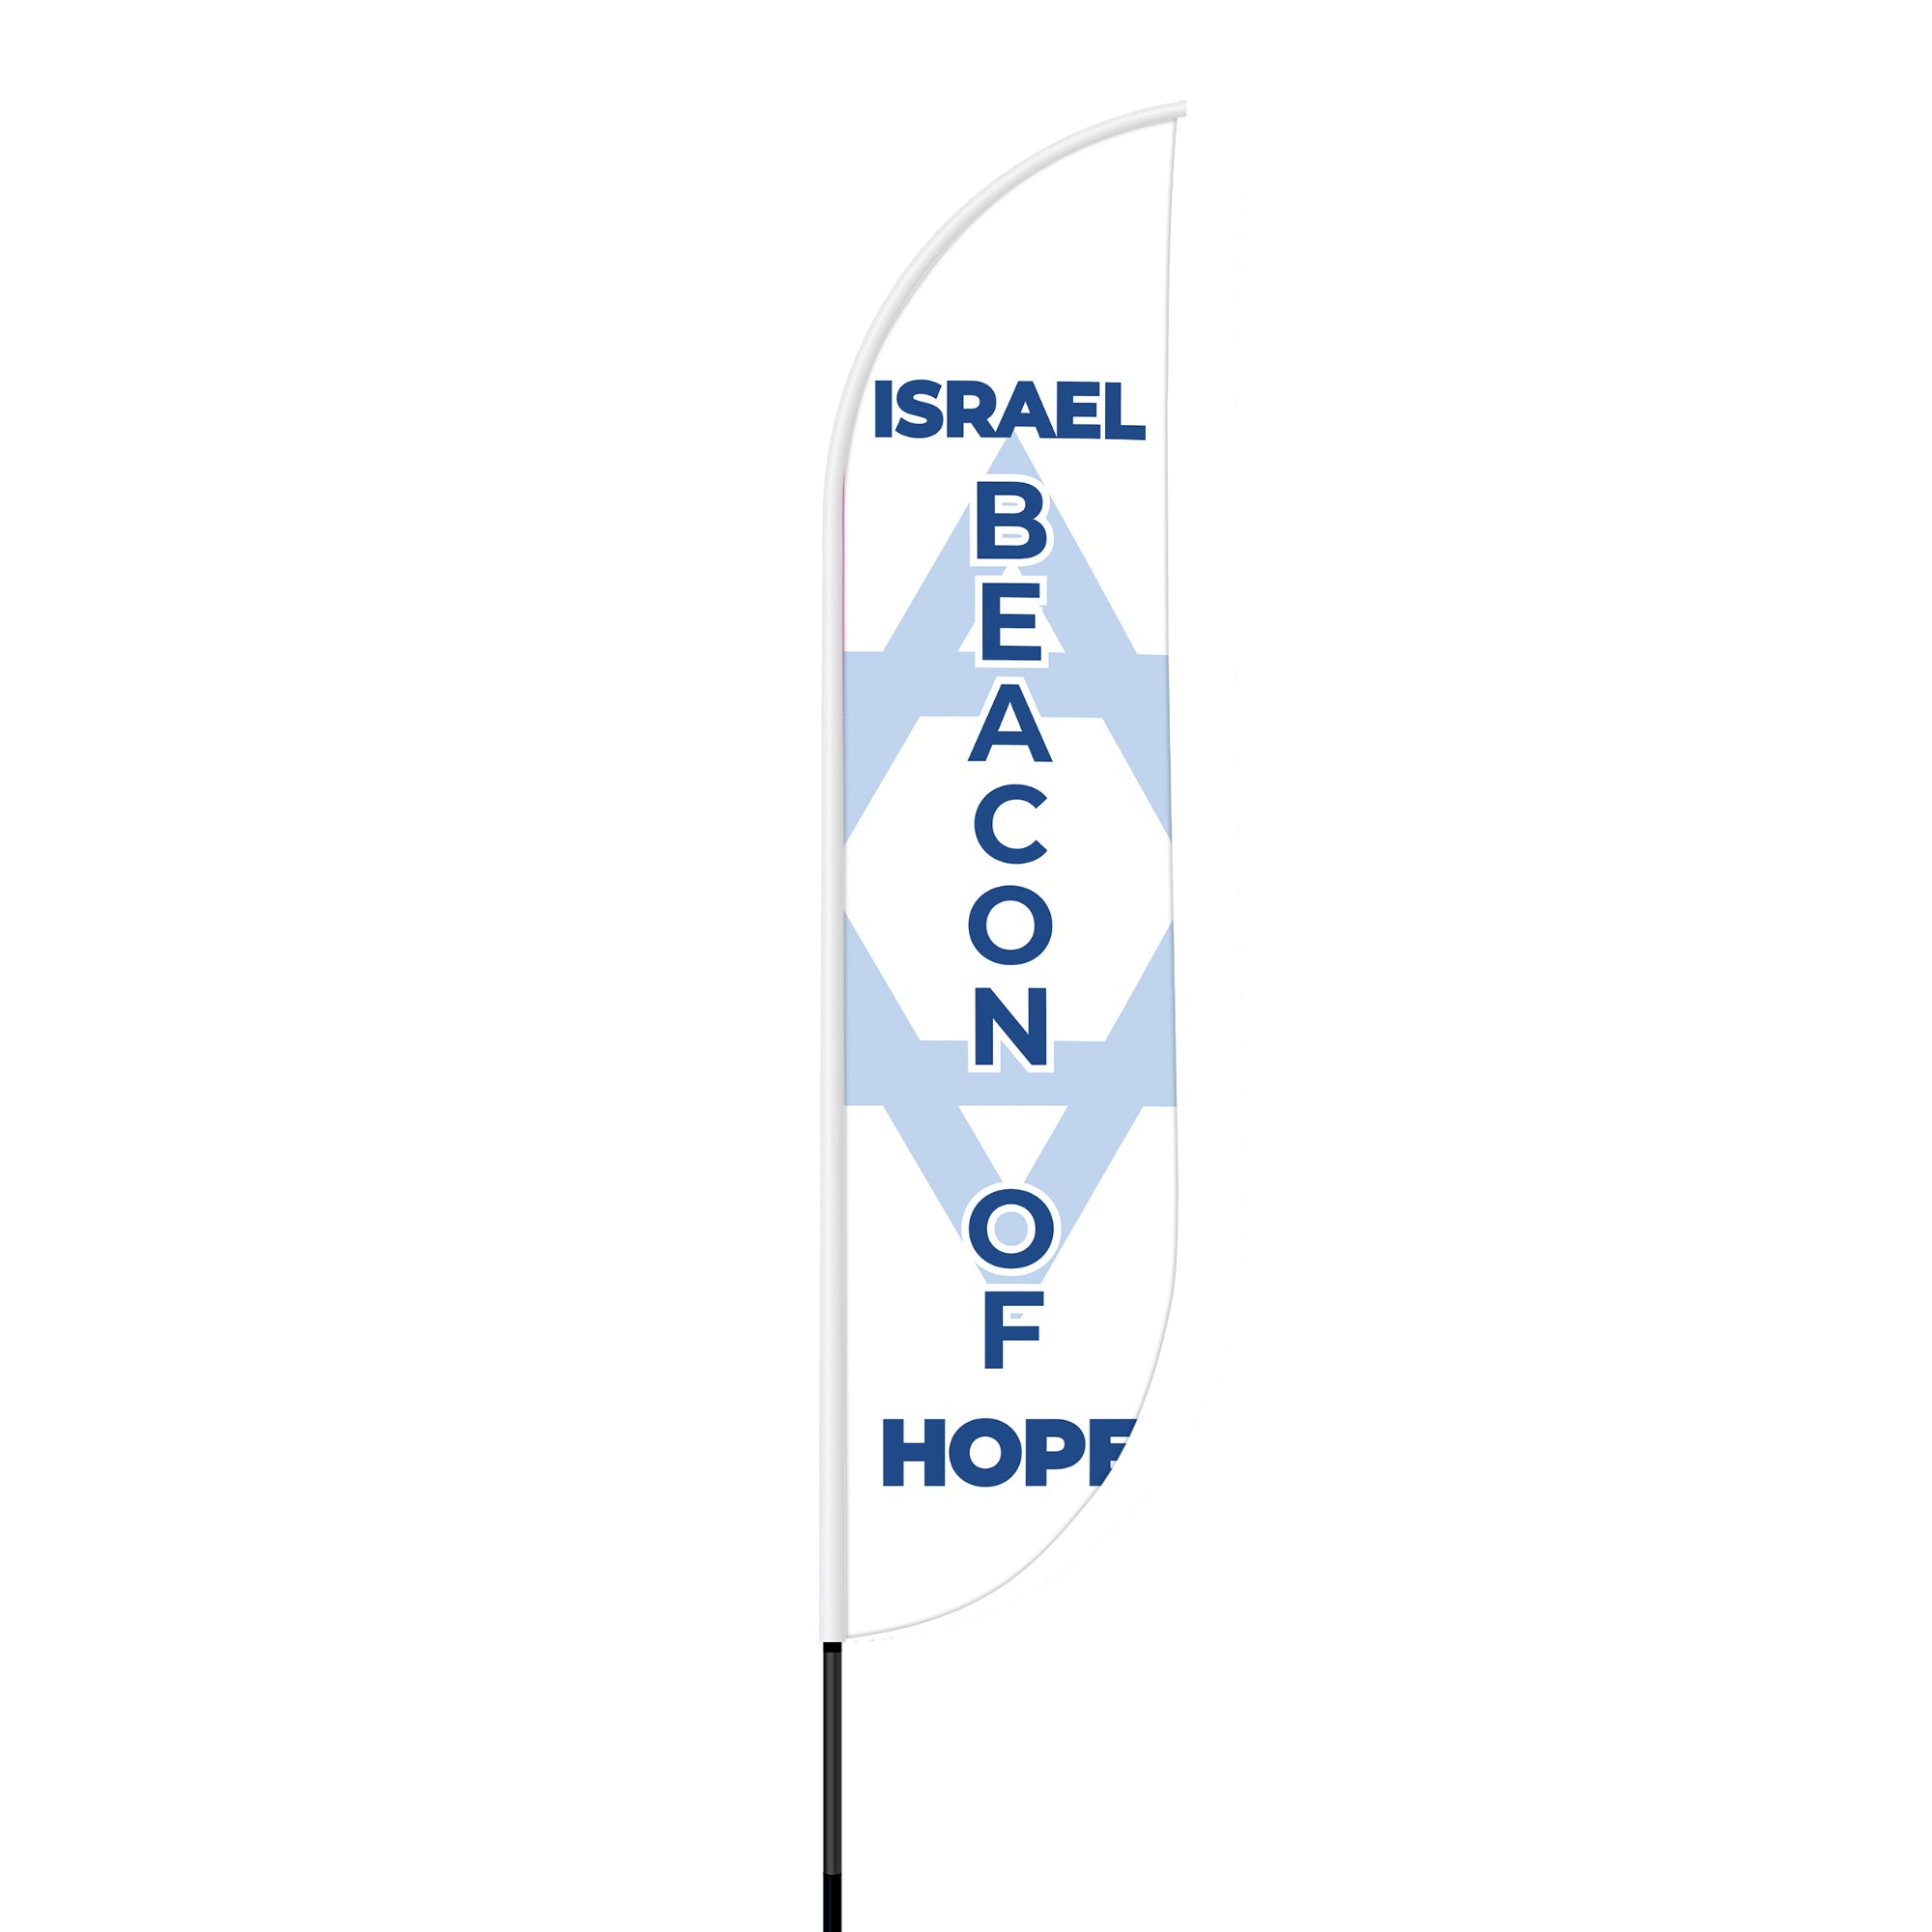 Israel Beacon of Hope Feather Flag